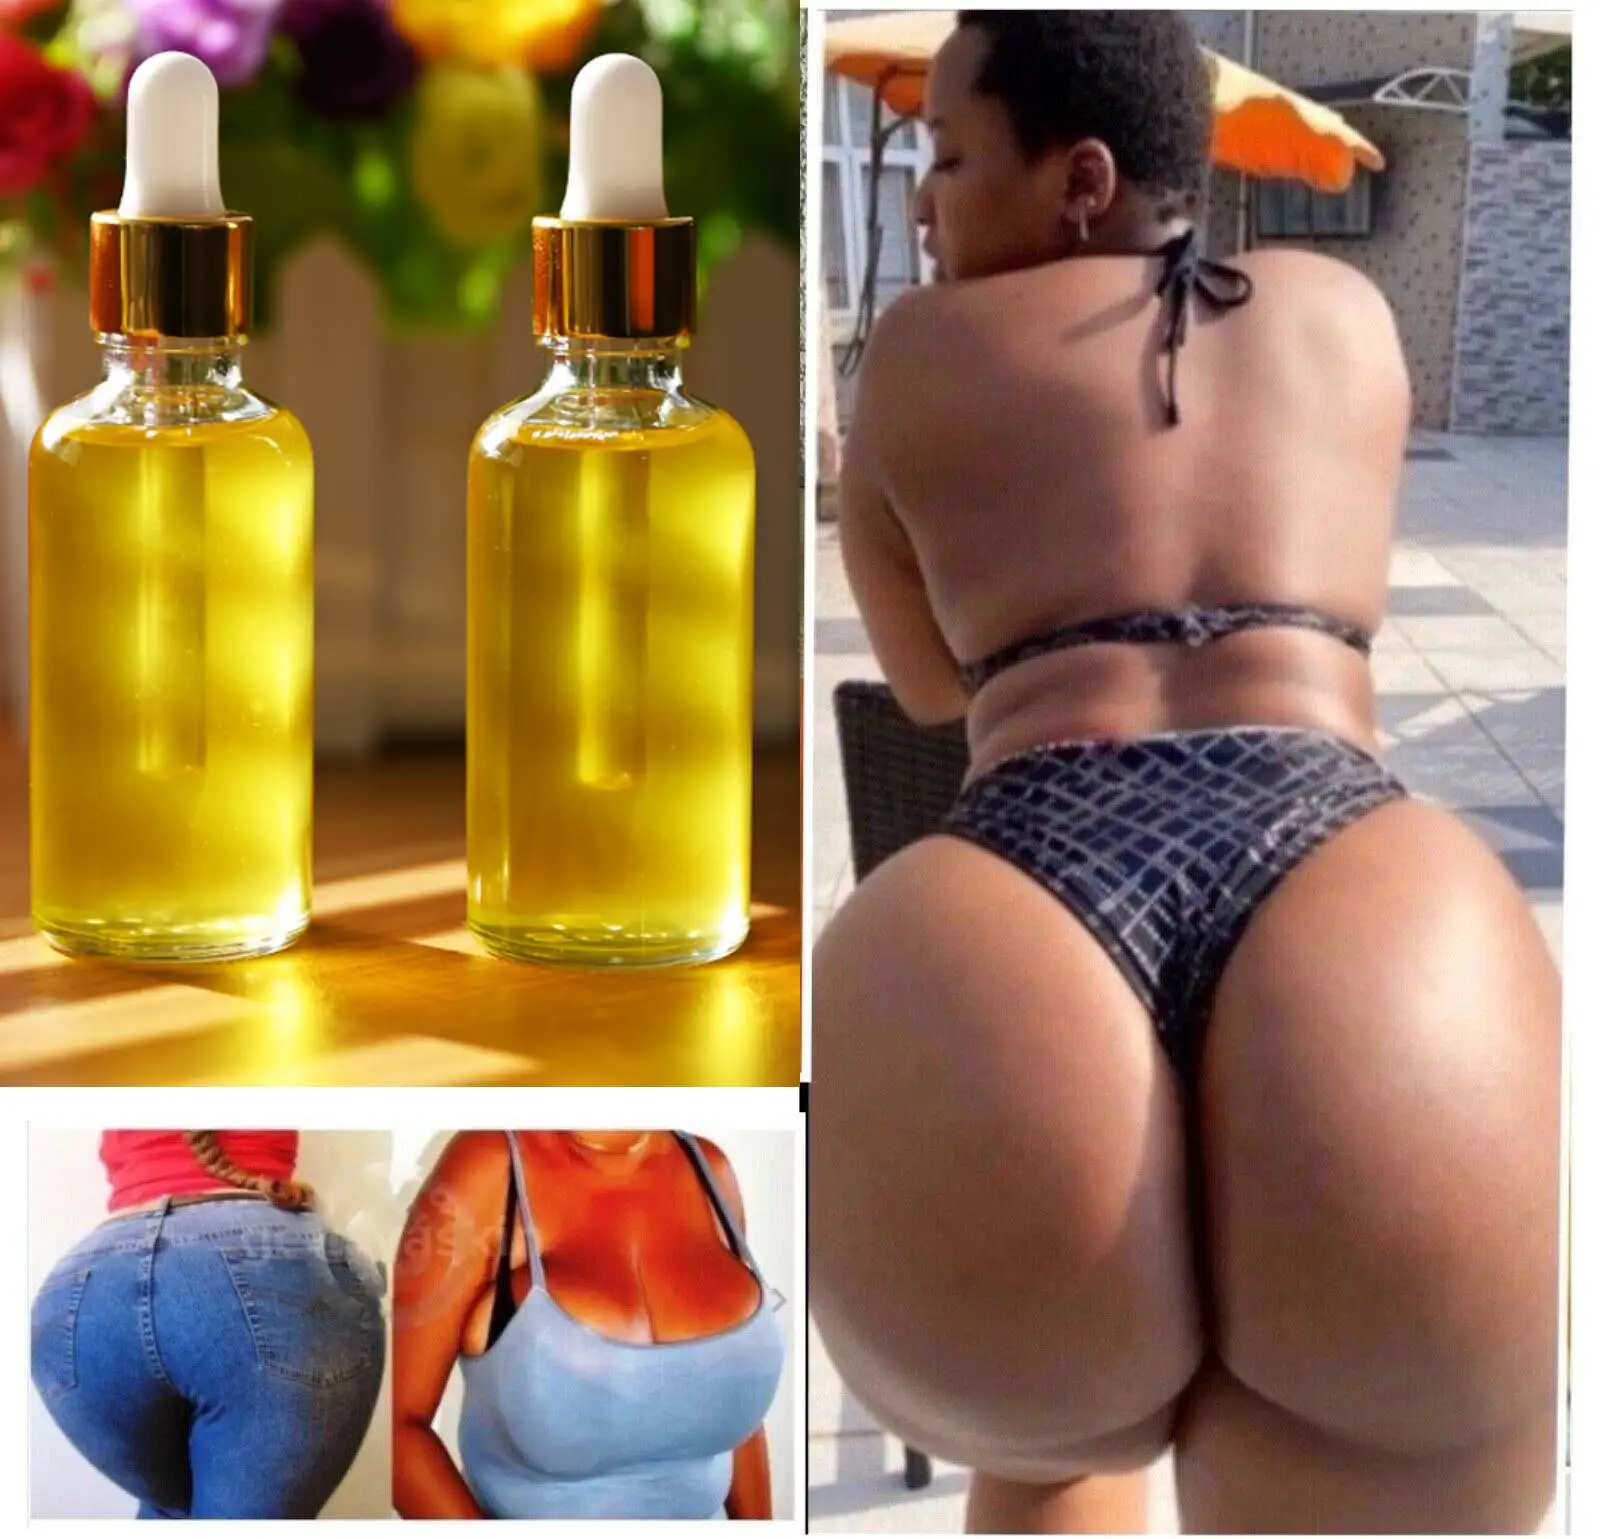 Oil of akpi firming care buttocks and breasts pure vegetable flexibility